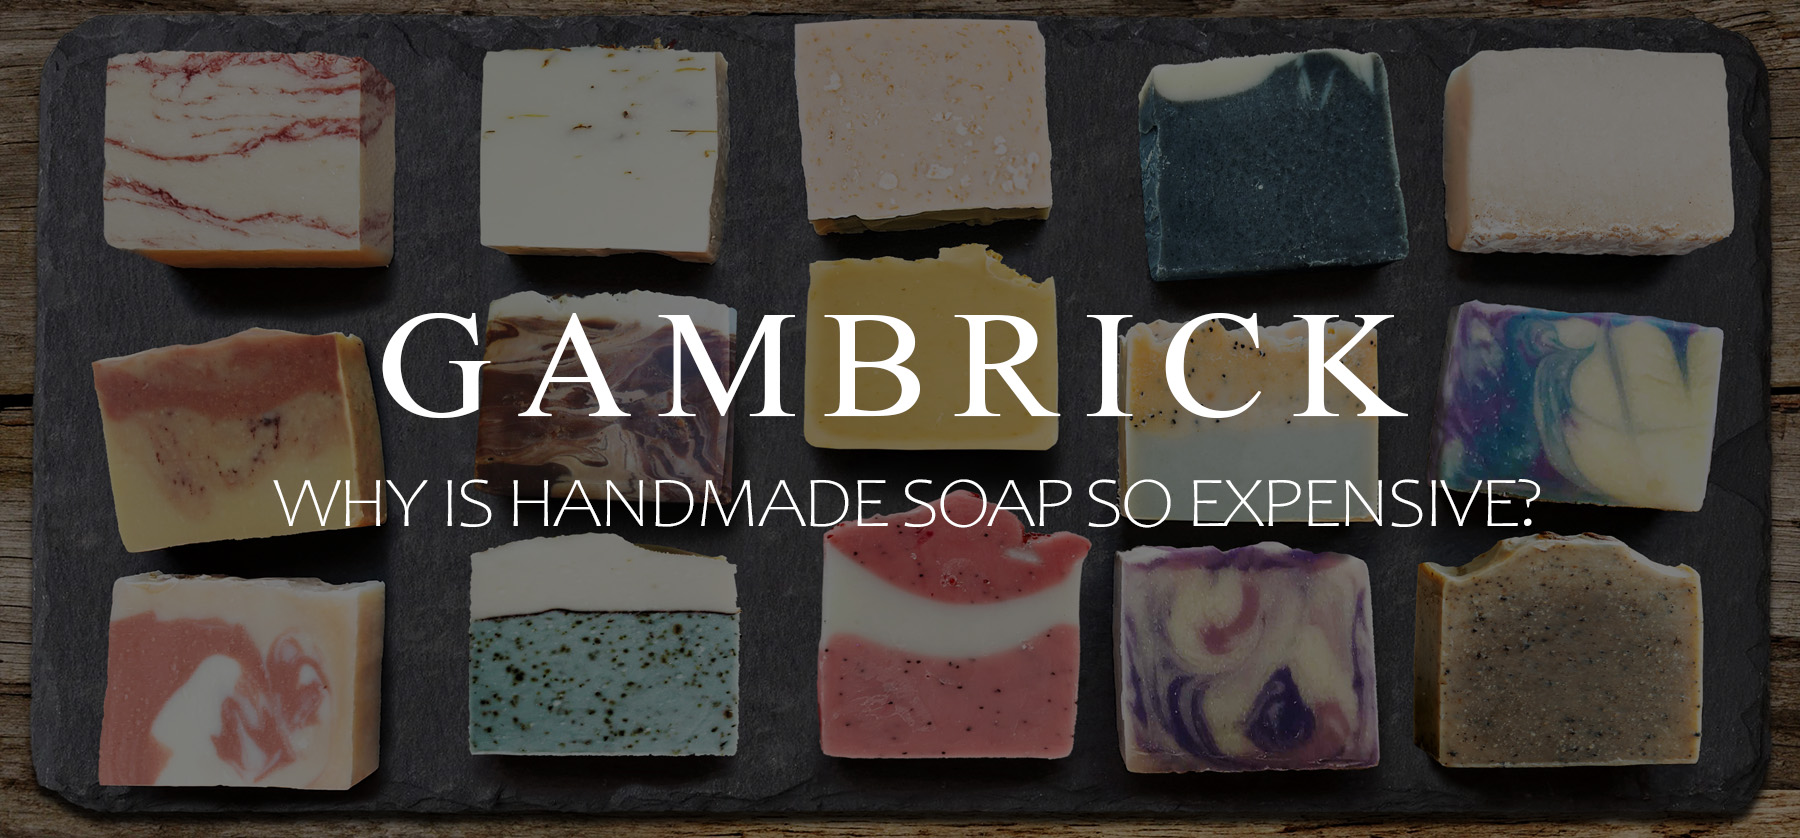 Why Is Handmade Soap So Expensive banner 1.0